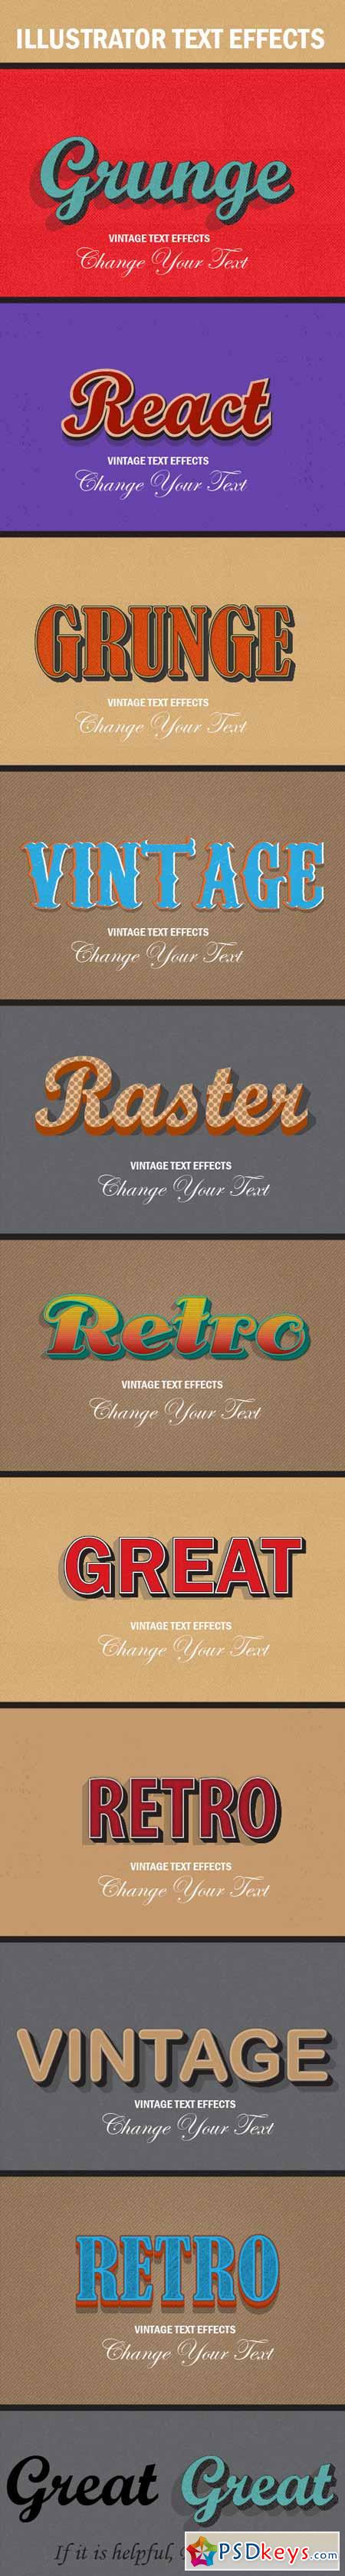 Retro Vintage Text Effects 11304957